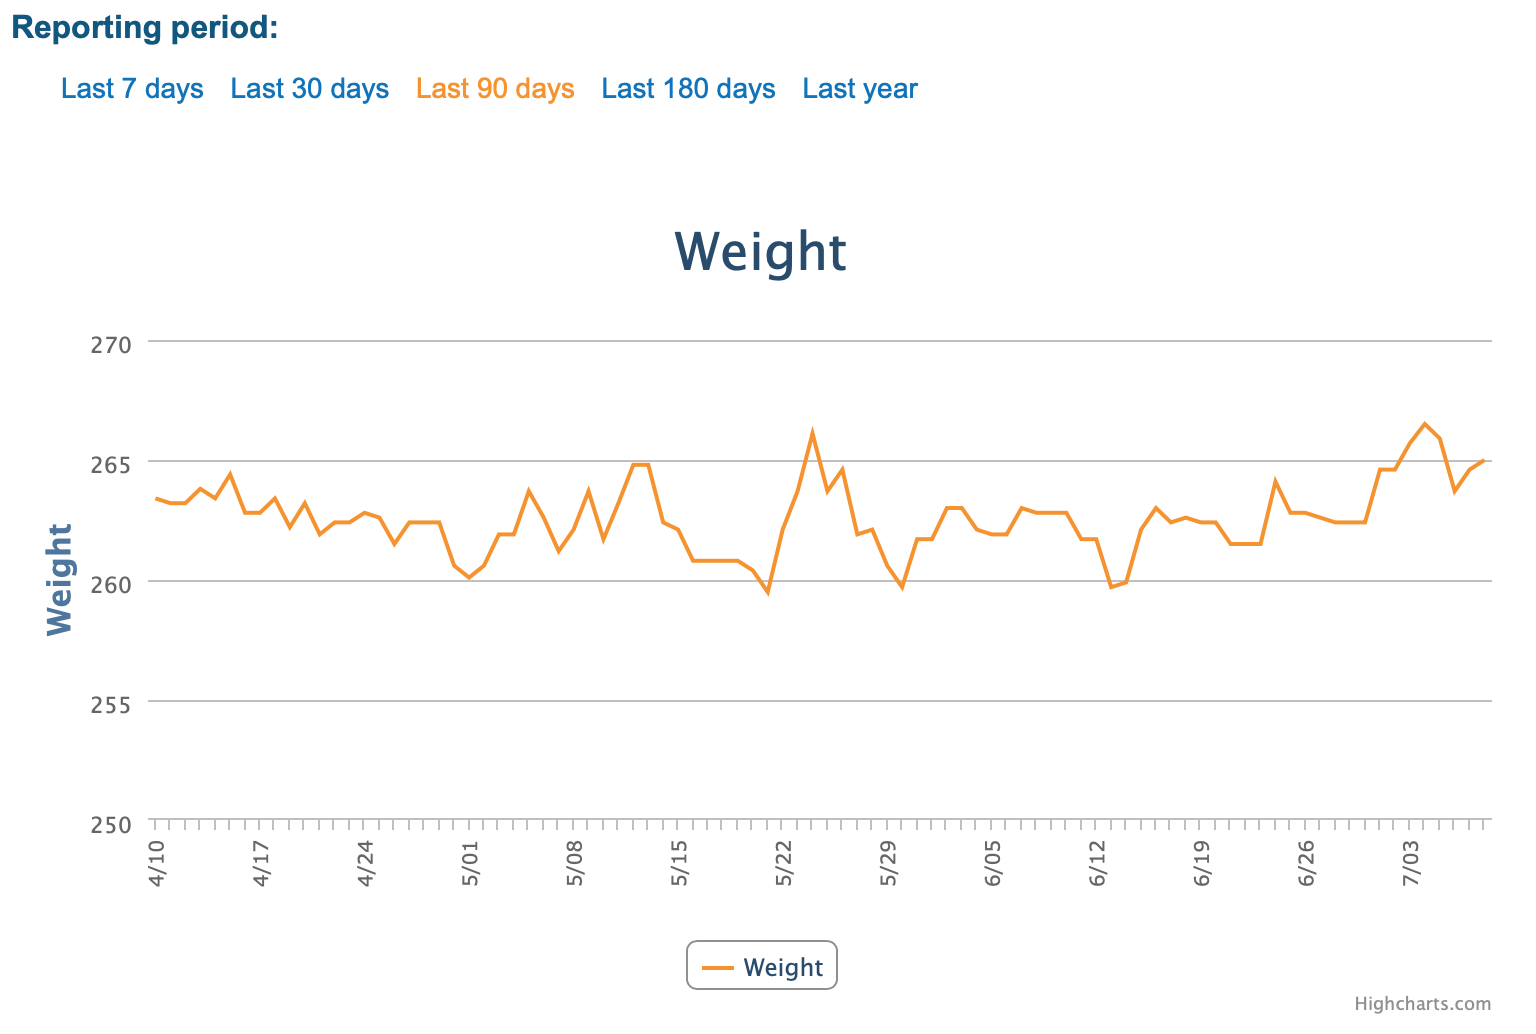 My weight loss for the last 90 days